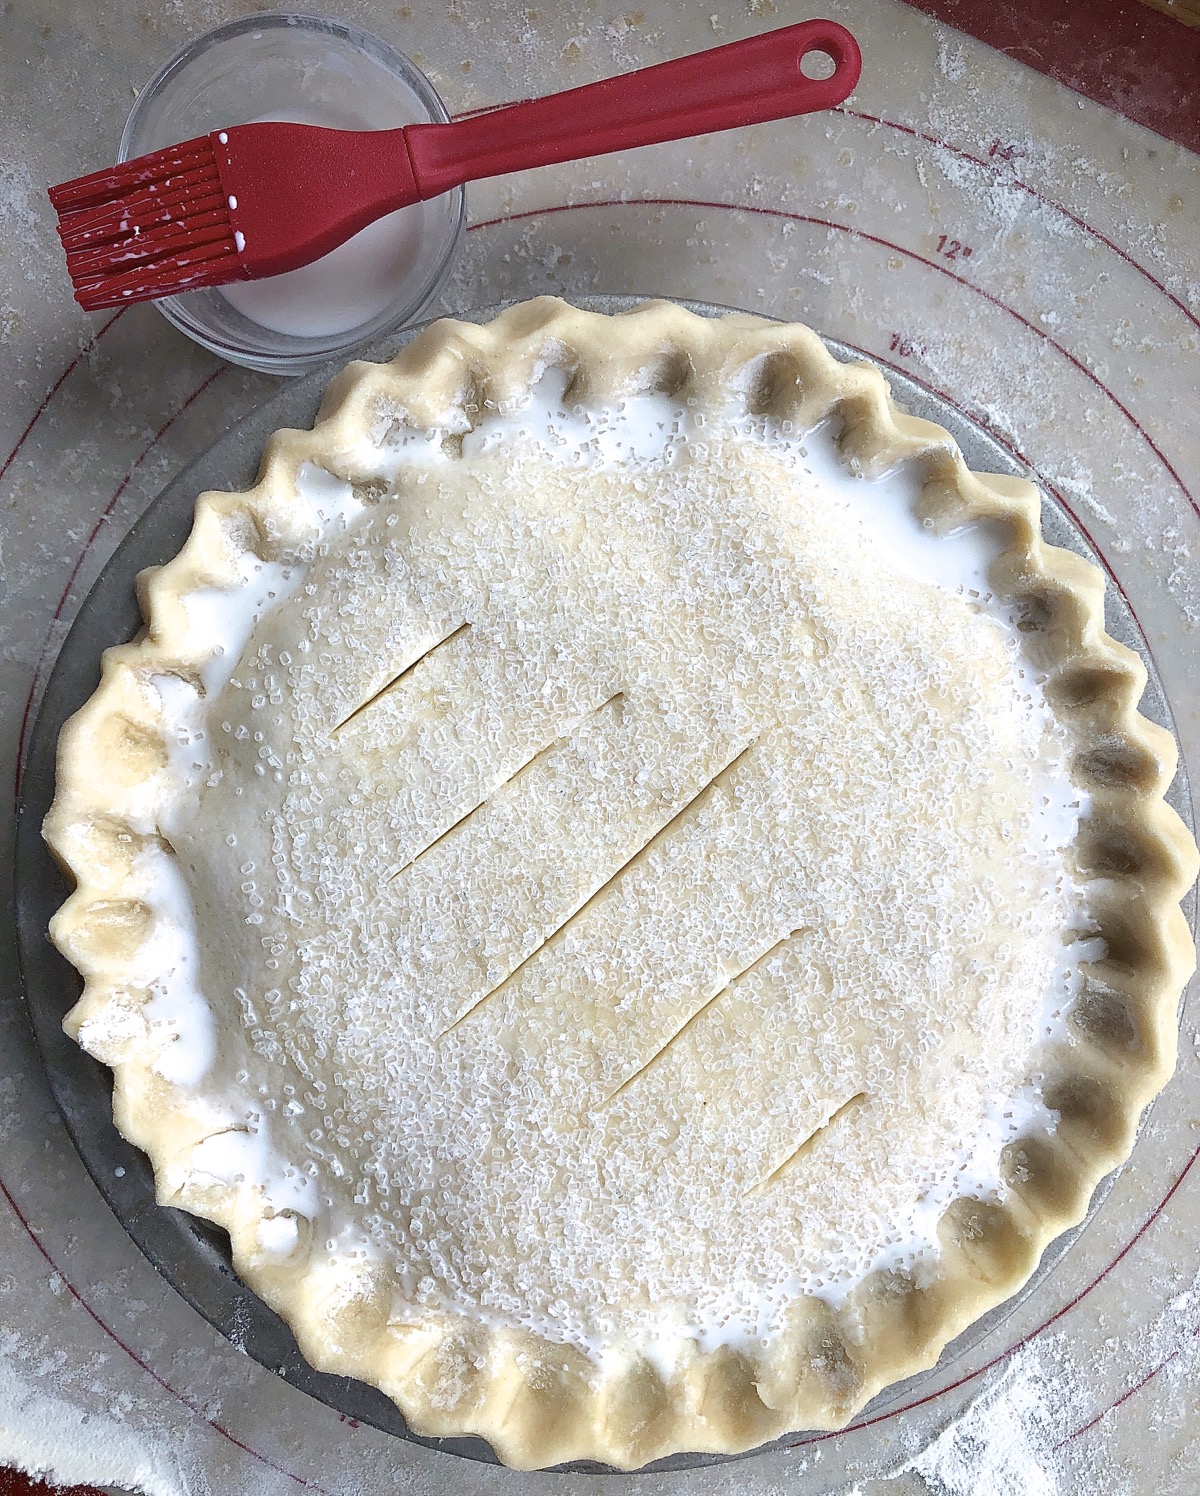 Unbaked peach-apricot-raspberry pie sprinkled with sugar and vented with slashes